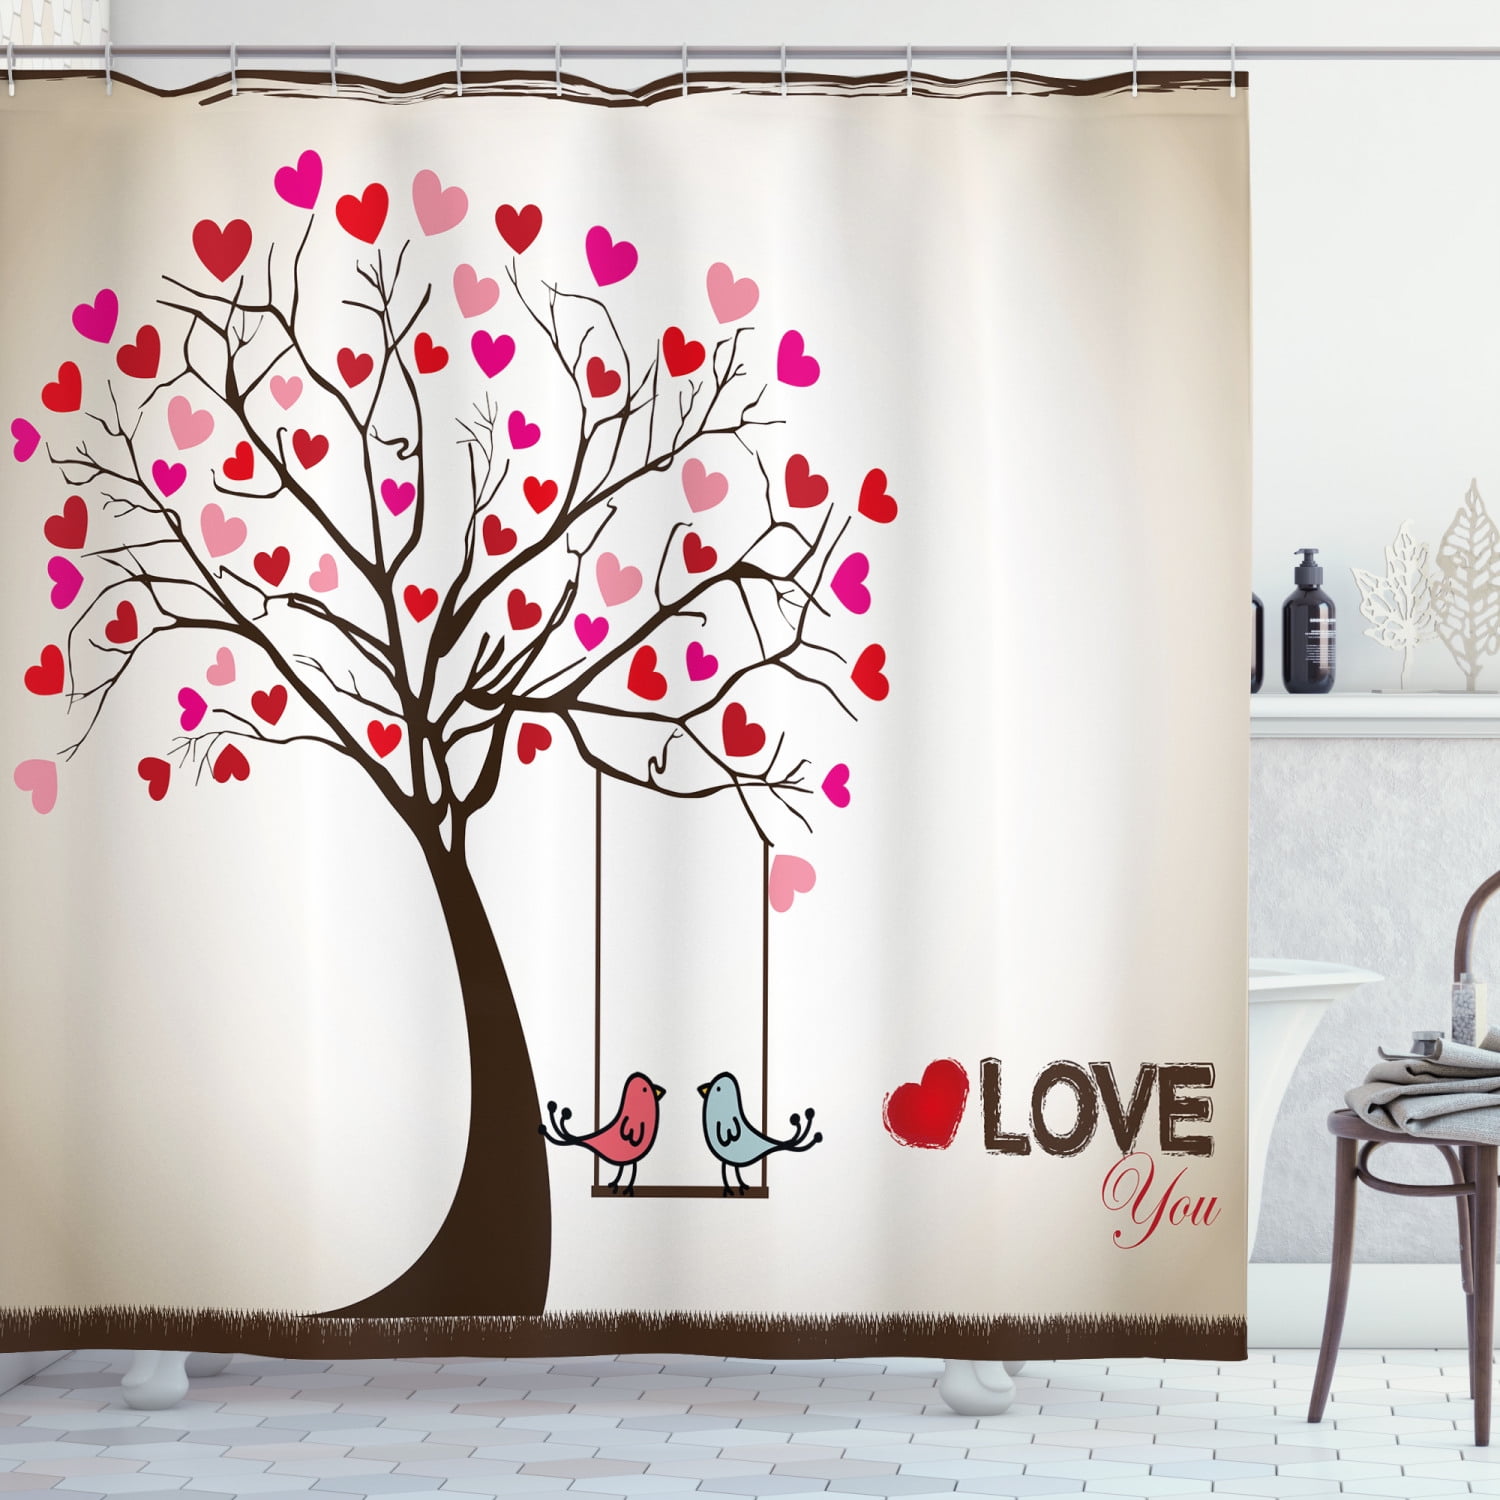 Romantic Valentine's Day Shower Curtain Polyester Fabric & Bathroom Accessories 